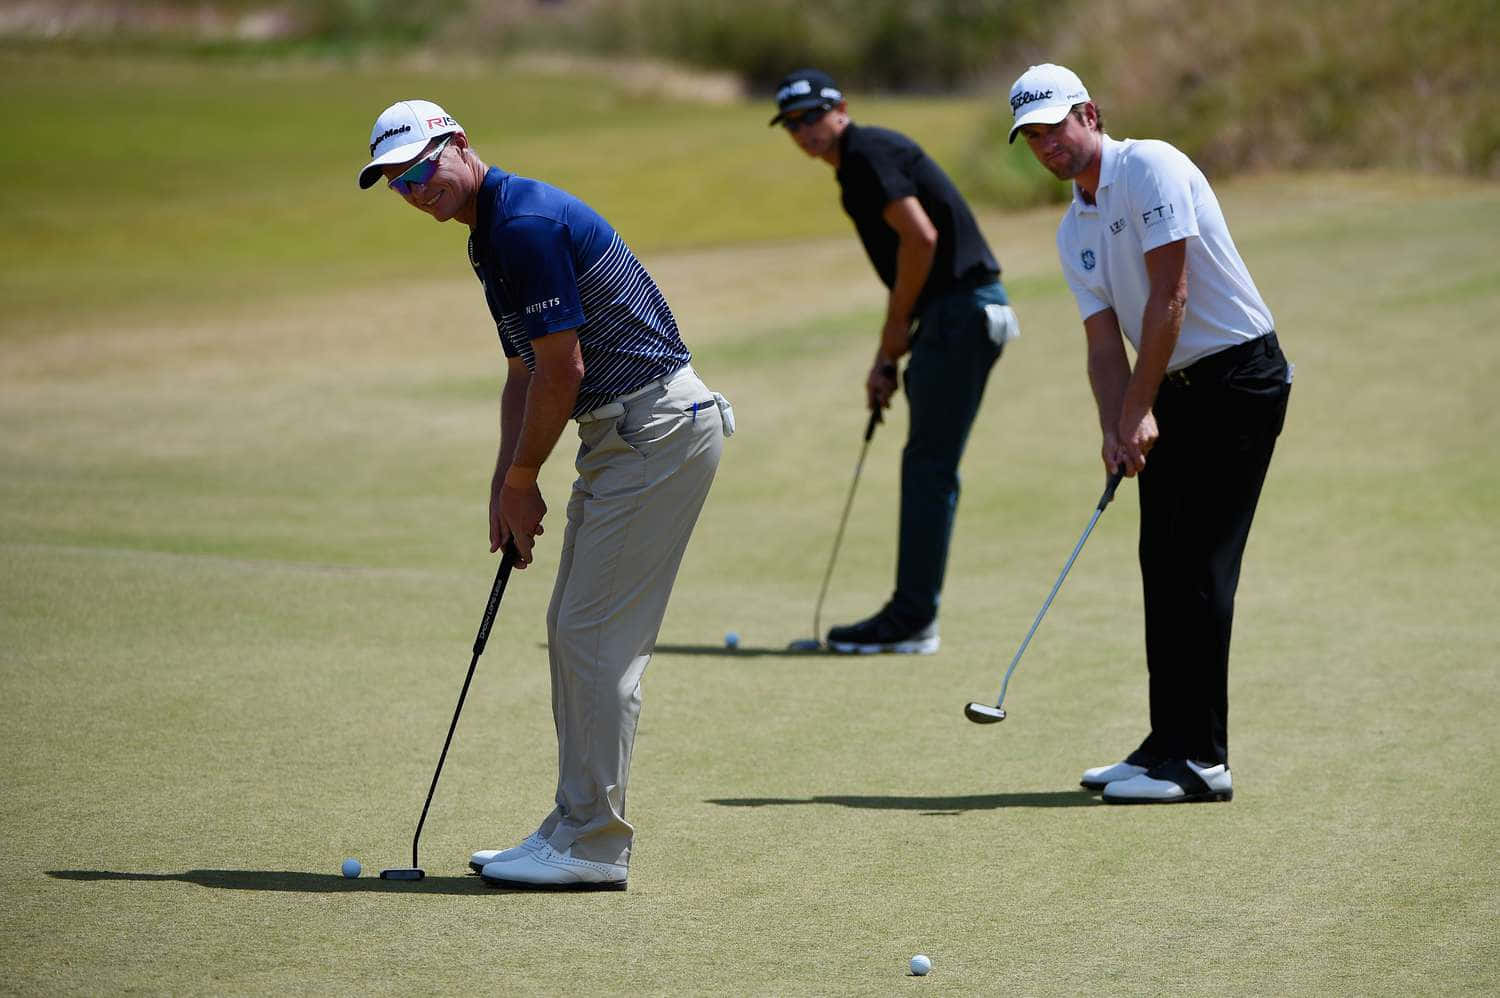 John Senden And Two Other Golfers Wallpaper